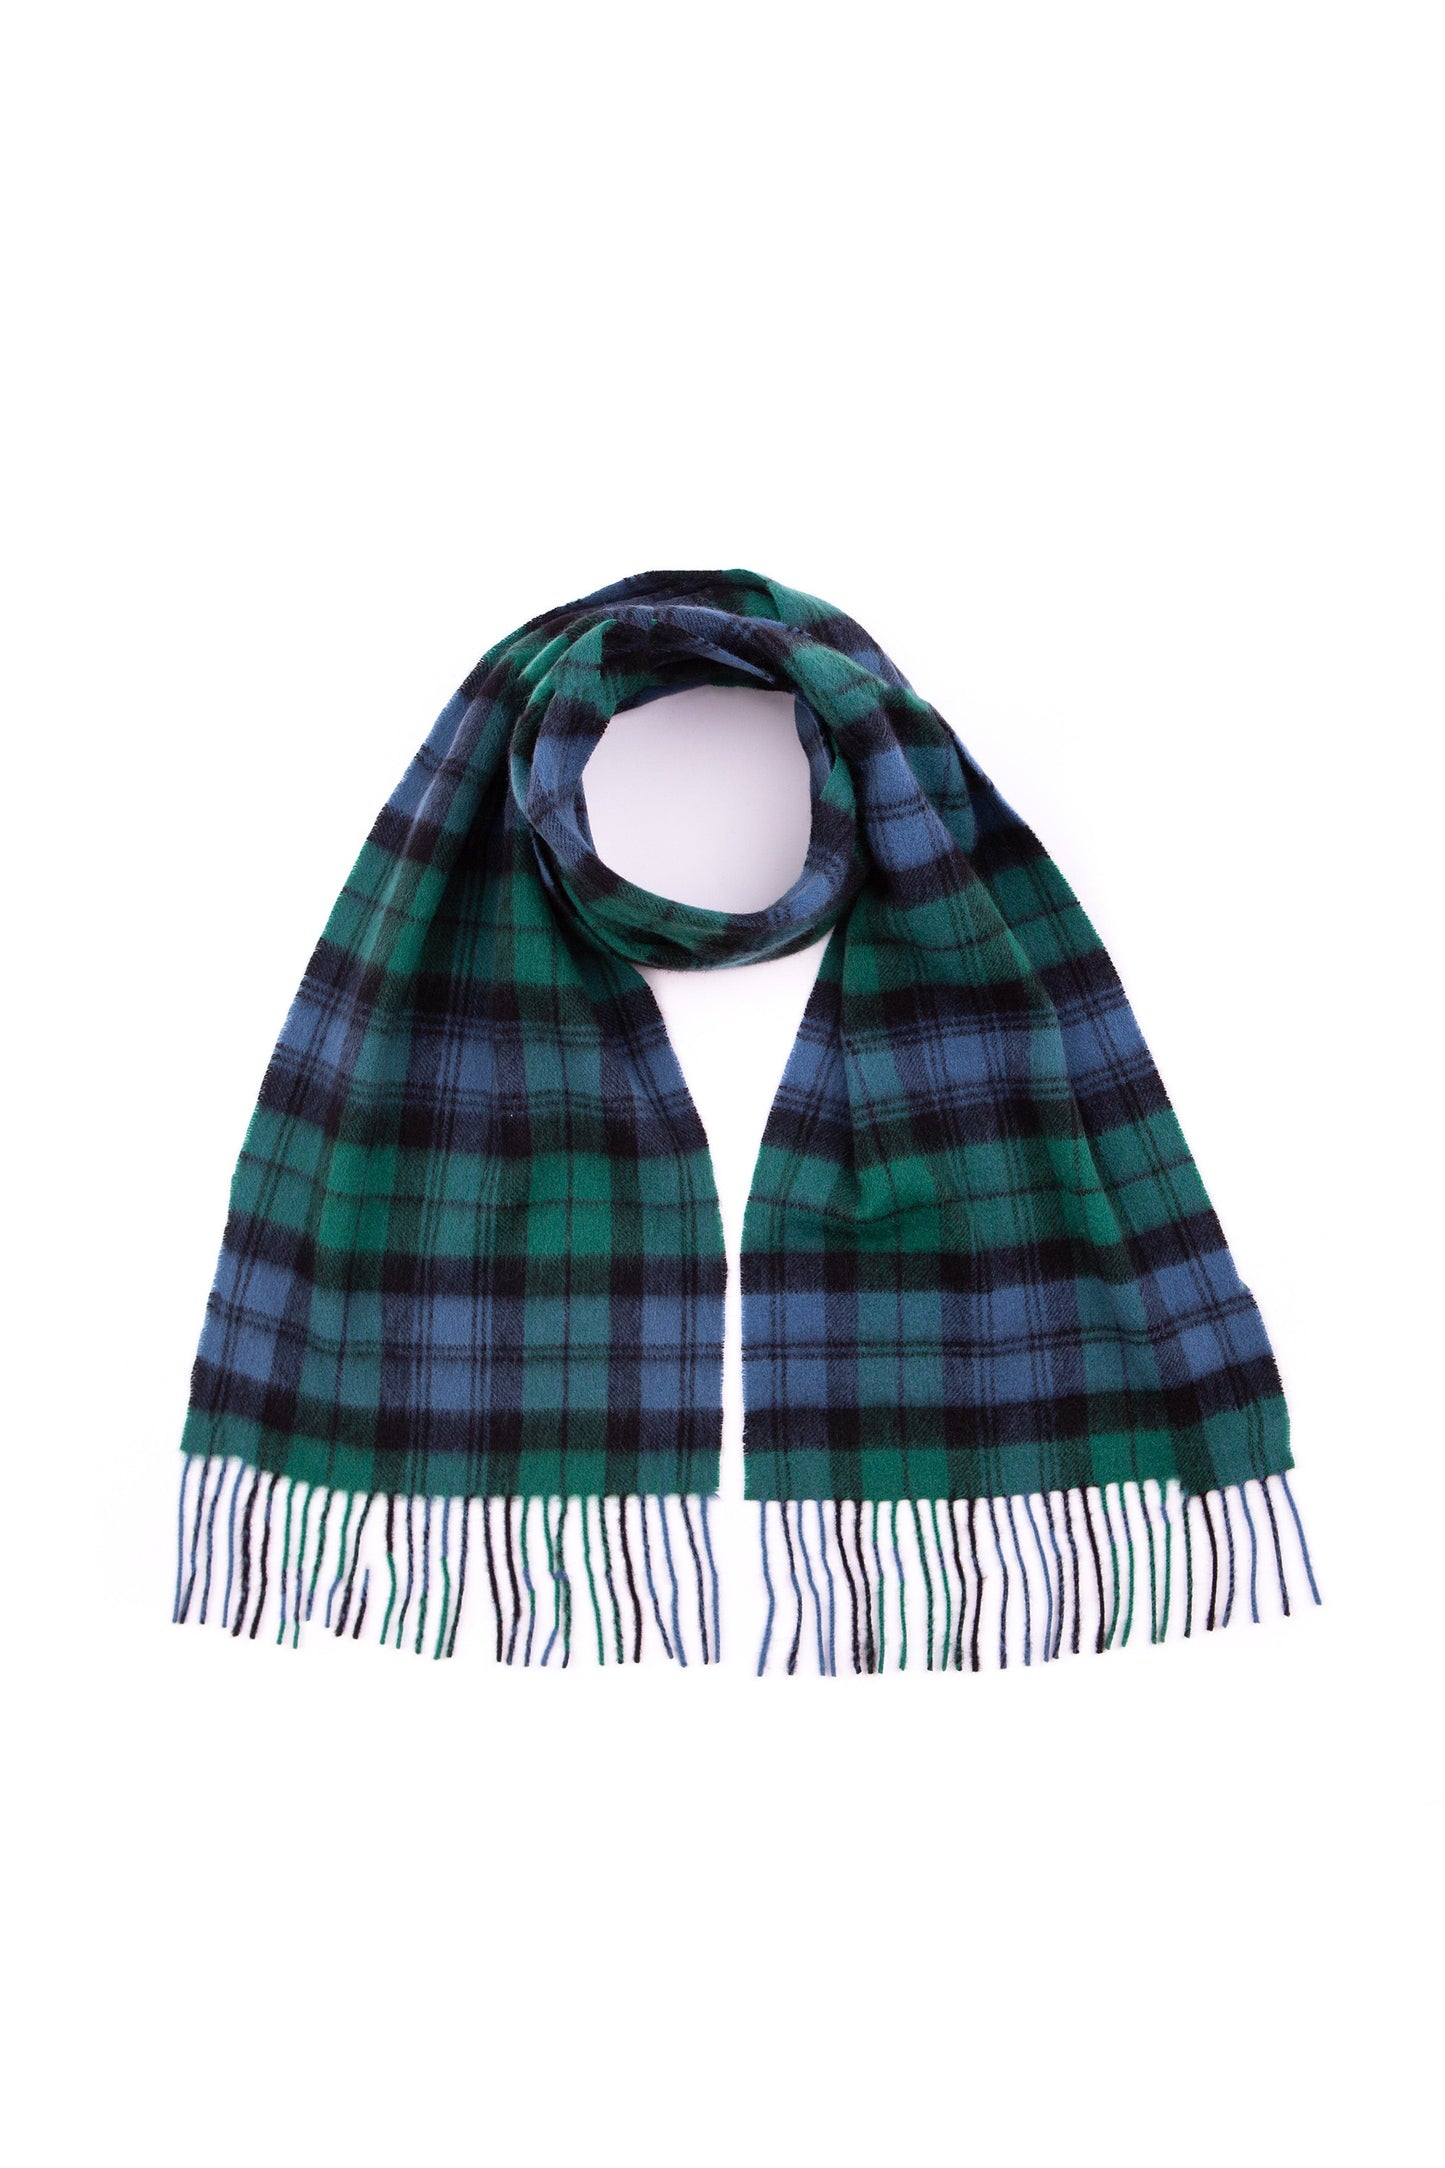 Cashmere Clan Scarf - Campbell Clan Ancient